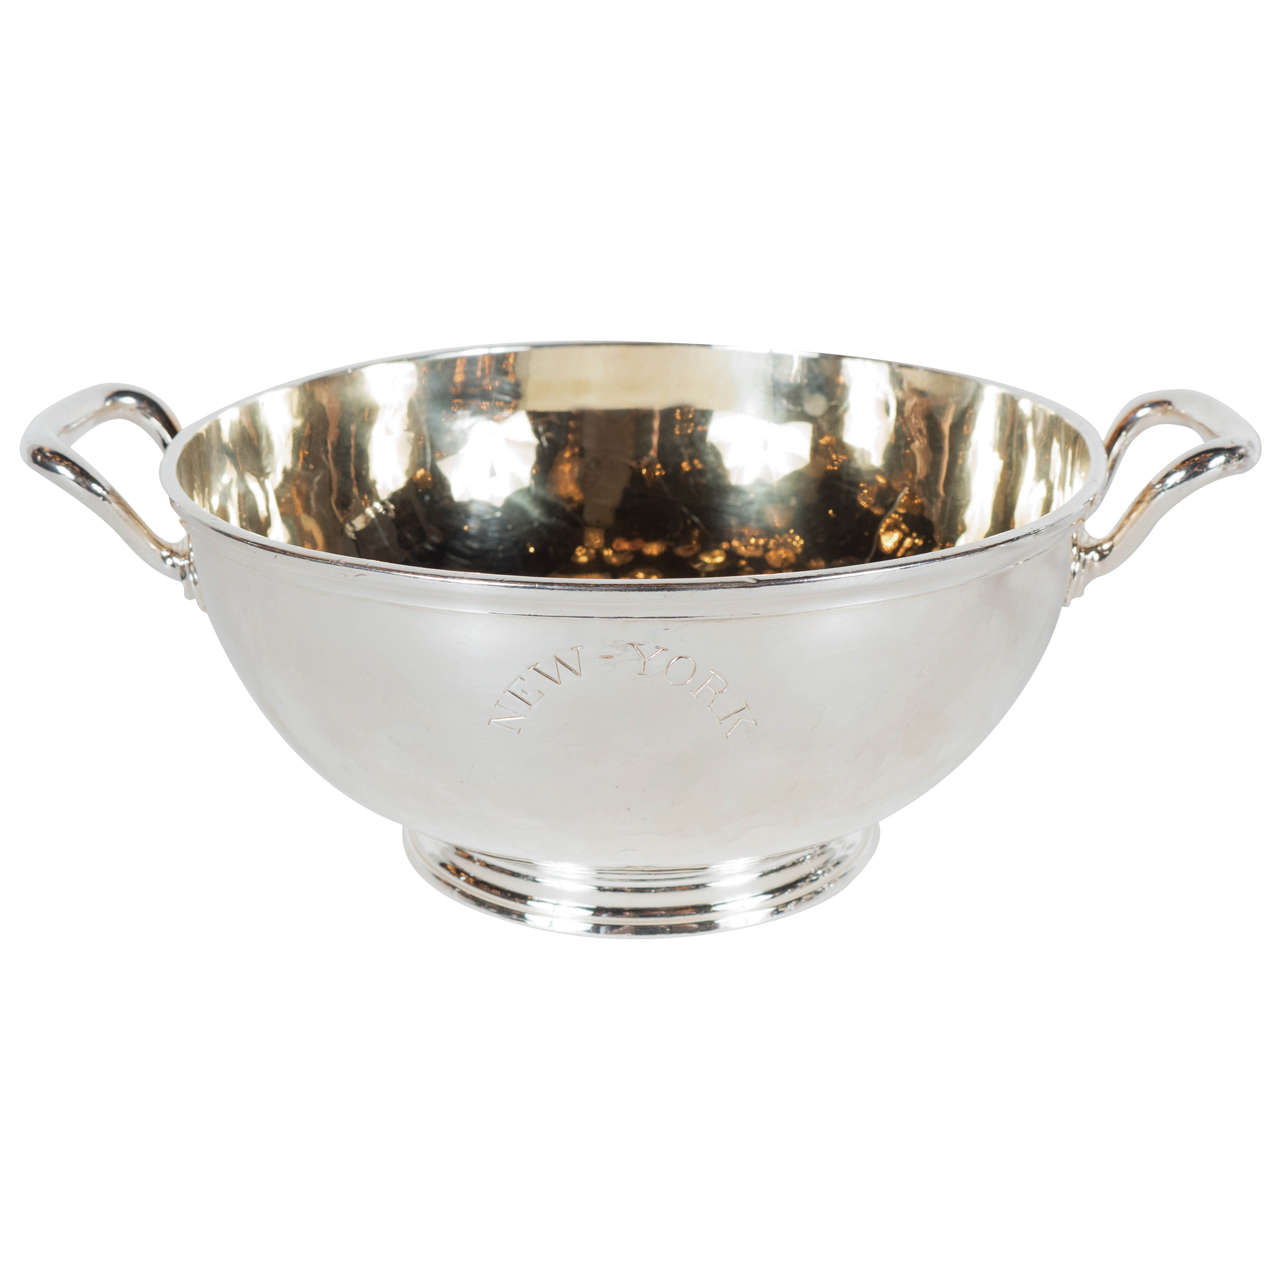 Gorgeous Art Deco Silver Plate and Gilt Bowl by Maison Christofle